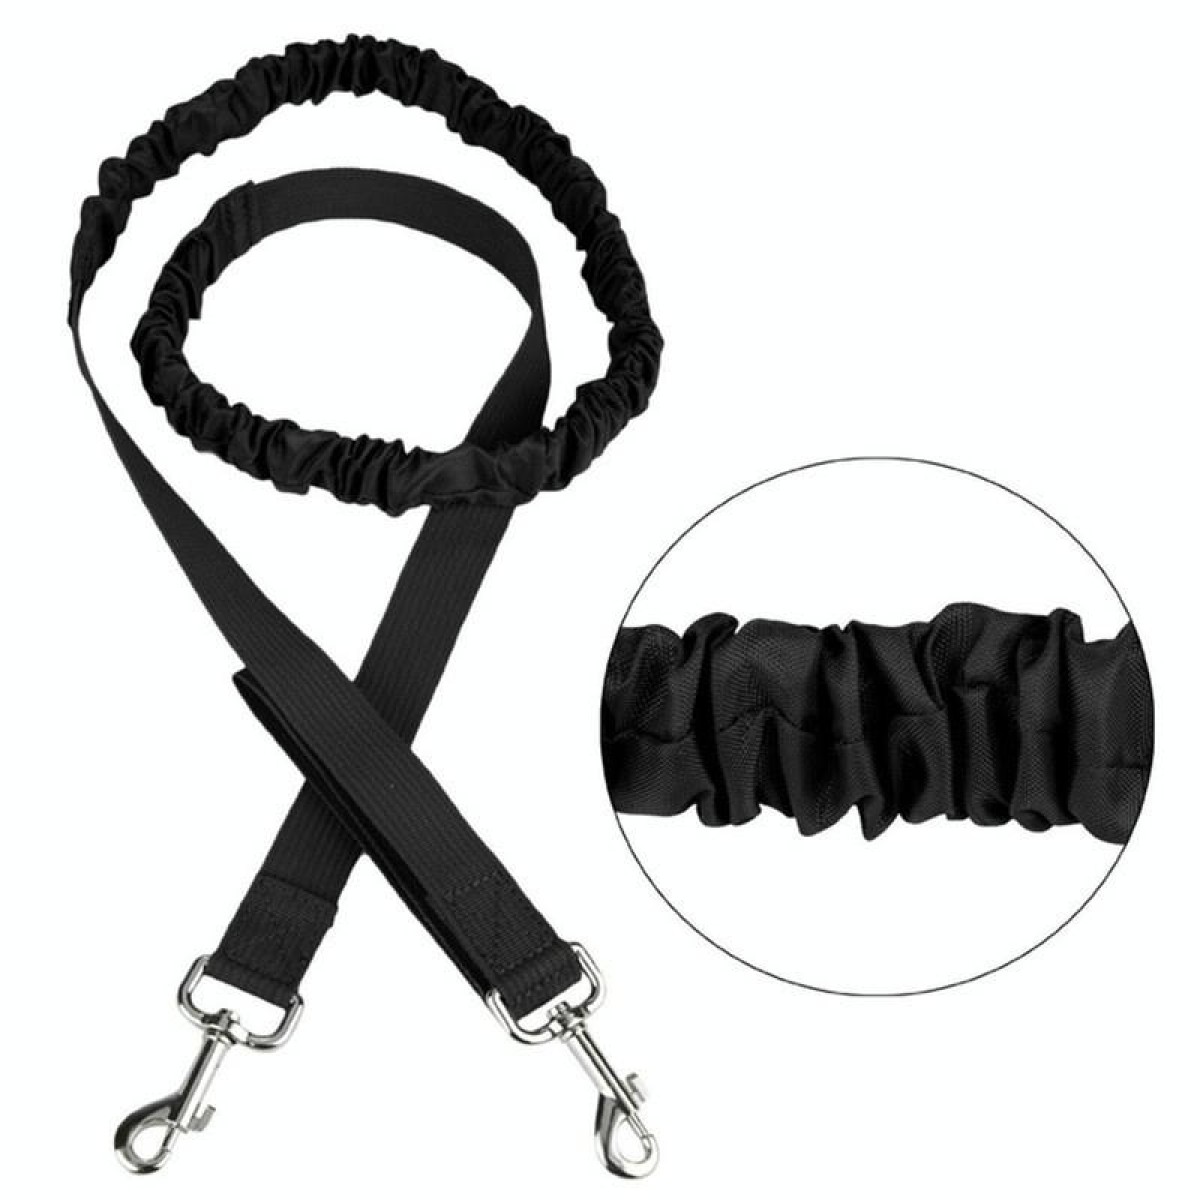 Dog Running Reflective Adjustable Belt Traction Rope with Small Bag, Specification:4-Piece Set(Gray)